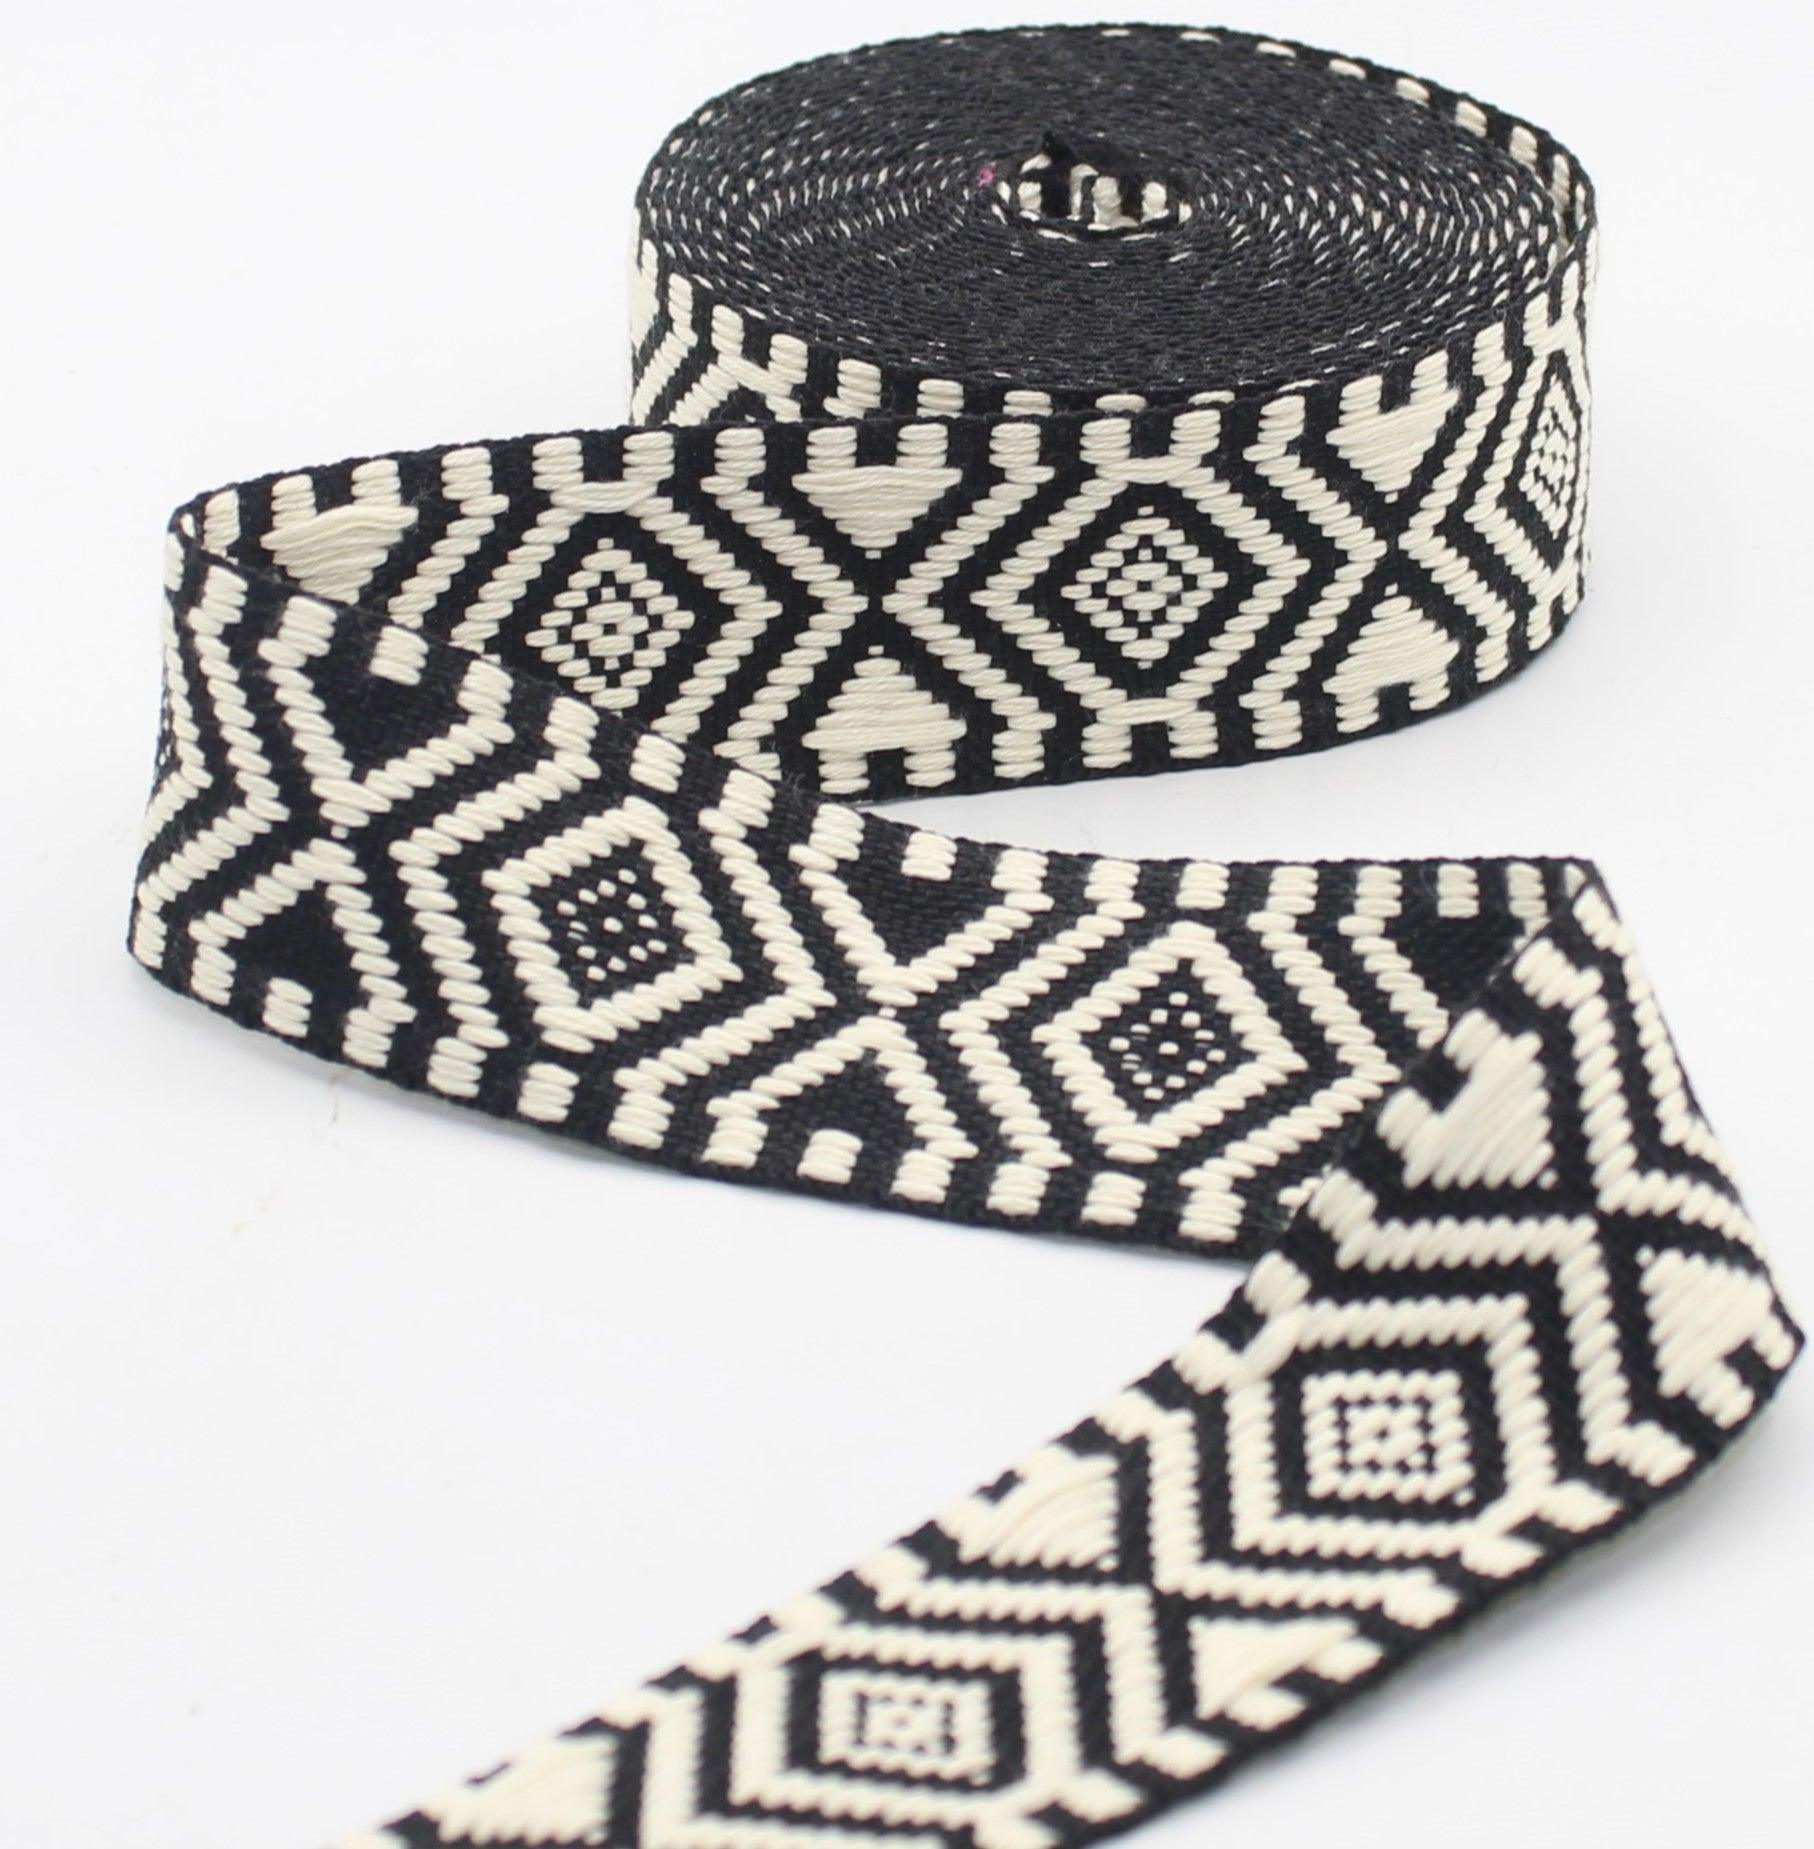 5 meters of Ethnic Strap with geometric patterns, 40mm #RUB3561 - ACCESSOIRES LEDUC BV